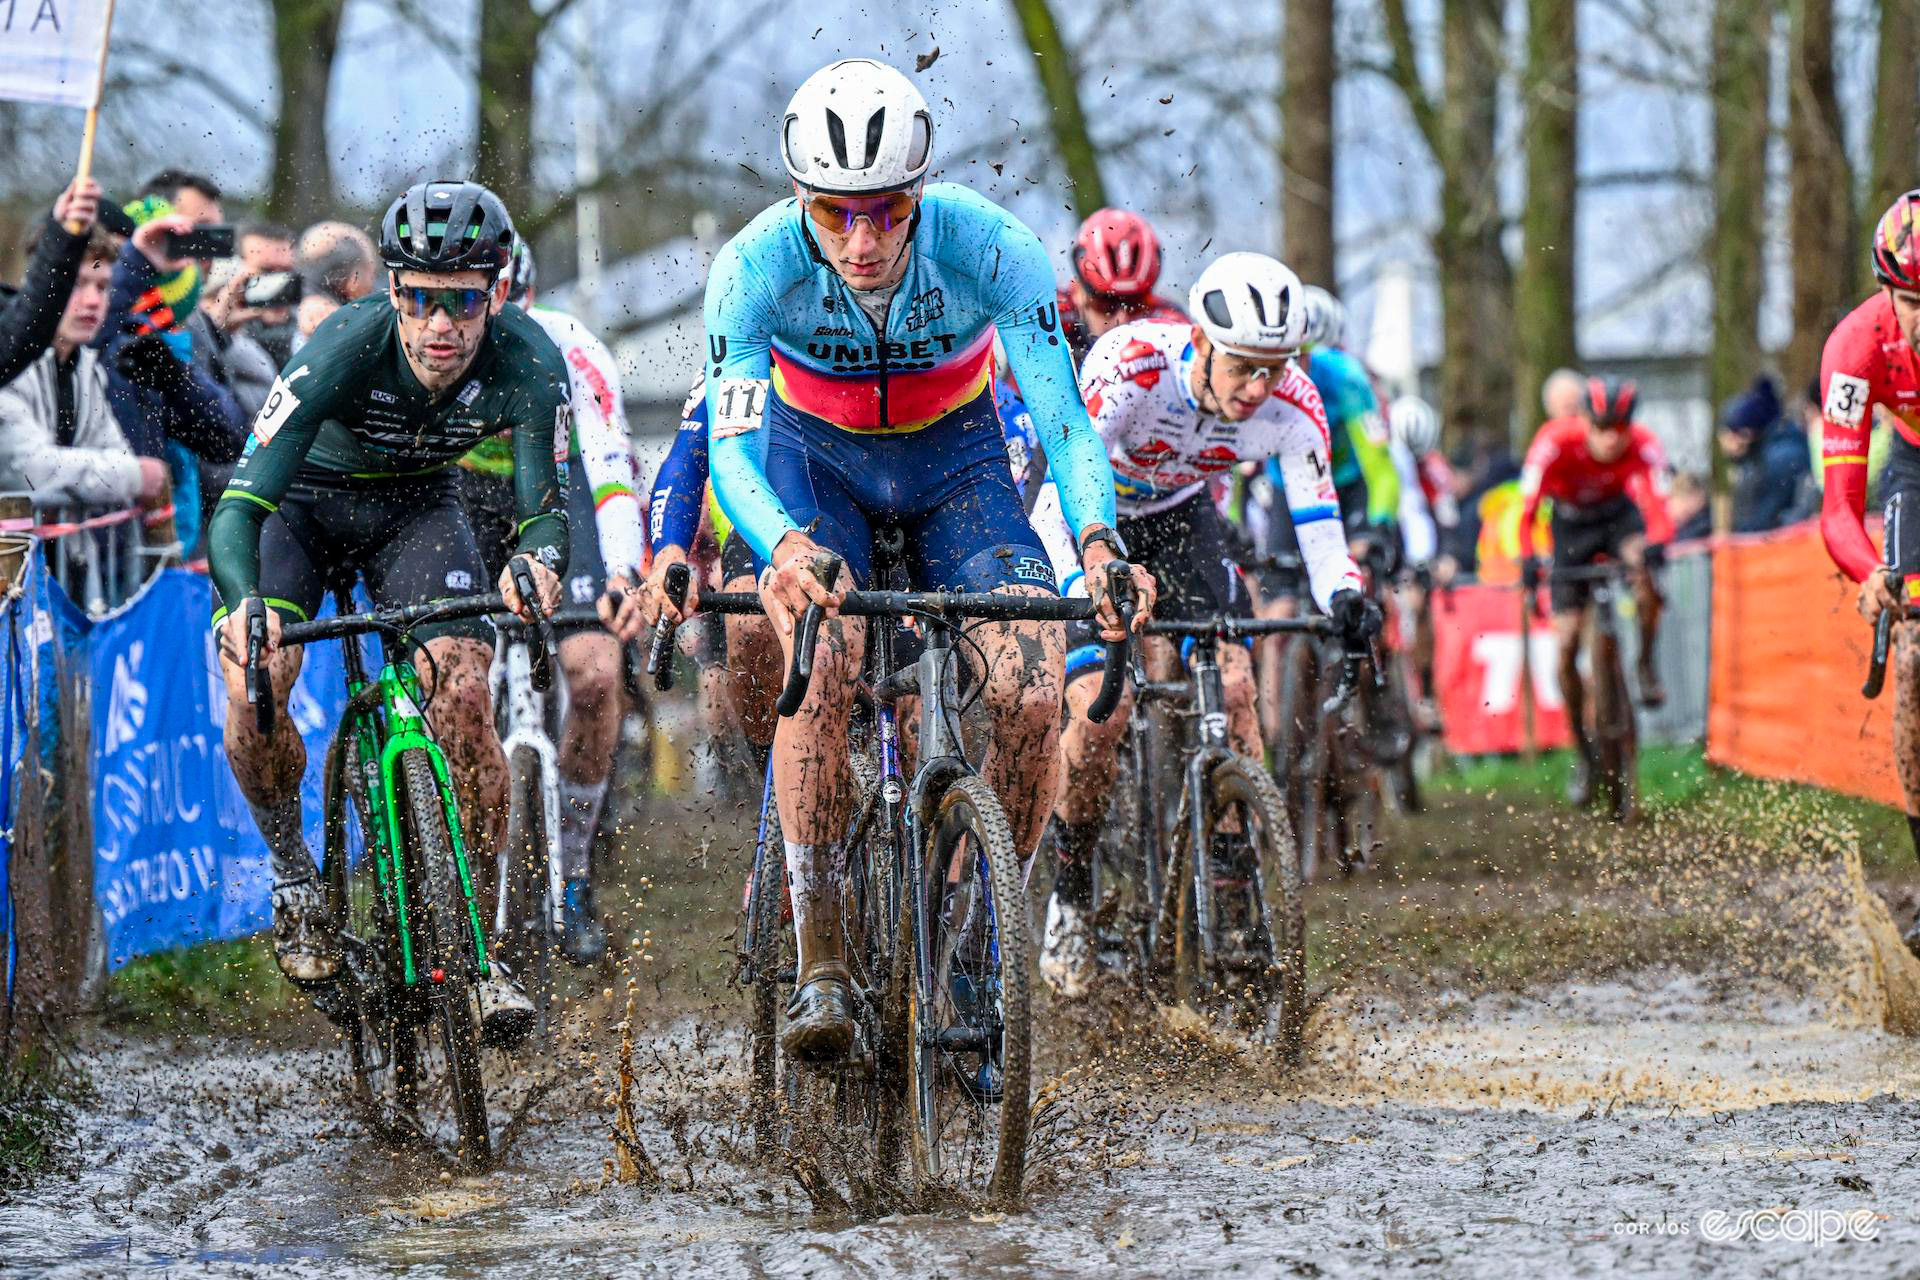 Lander Loockx leads the elite men's field in the first lap of Hexia Cyclocross Gullegem.